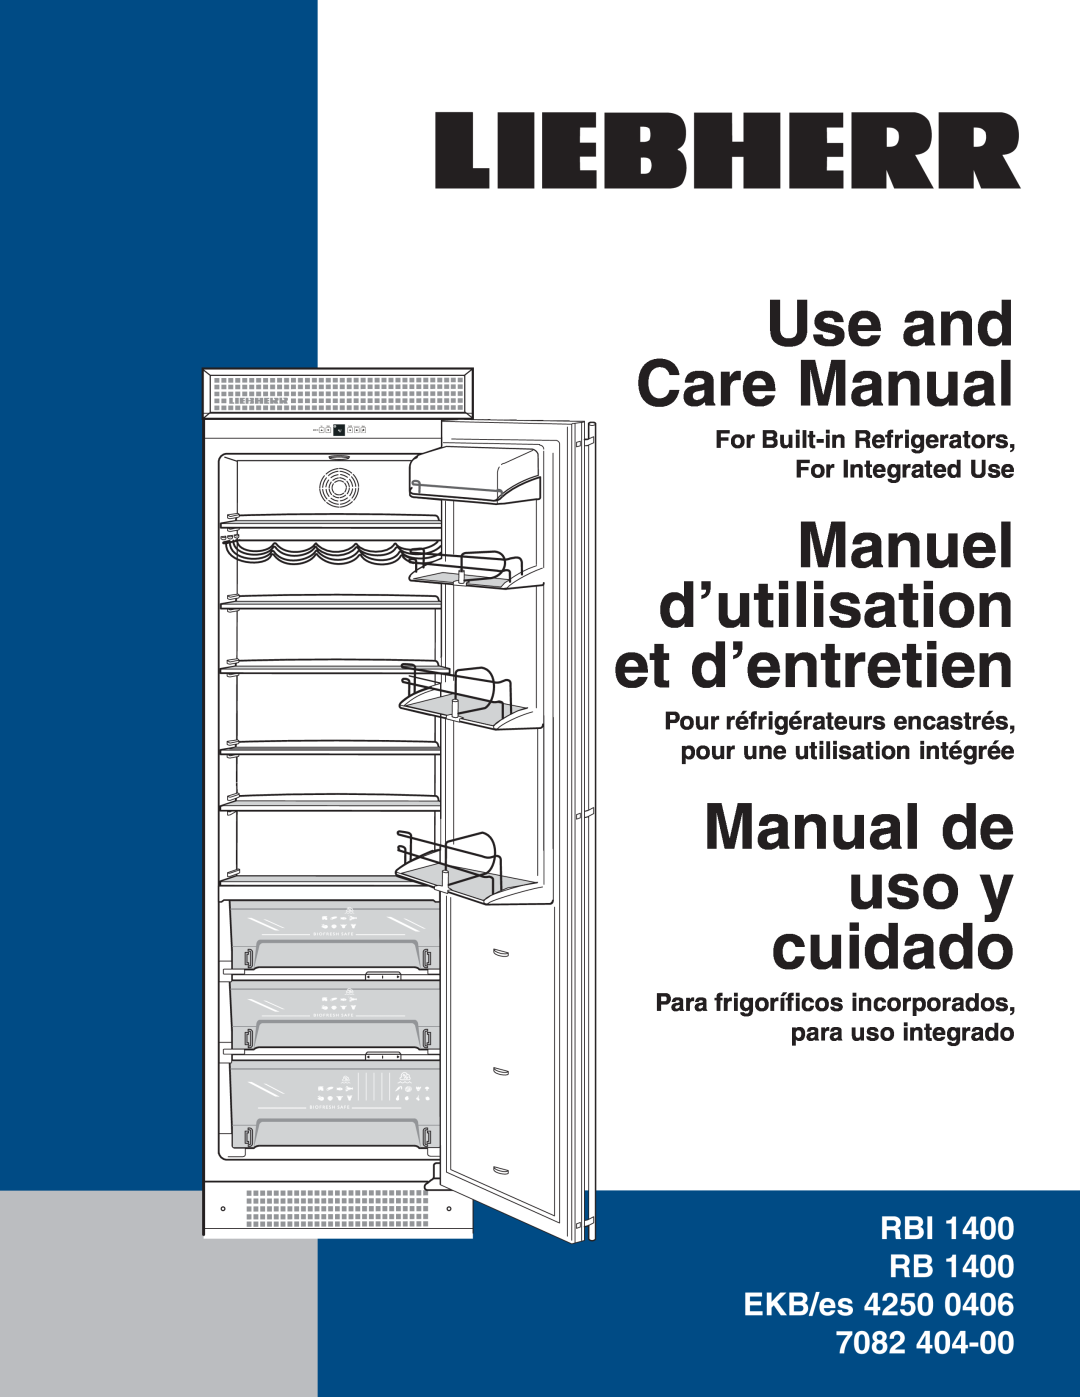 Liebherr RBI 1400, RB 1400 manuel dutilisation For Built-in Refrigerators For Integrated Use, Use and Care Manual 